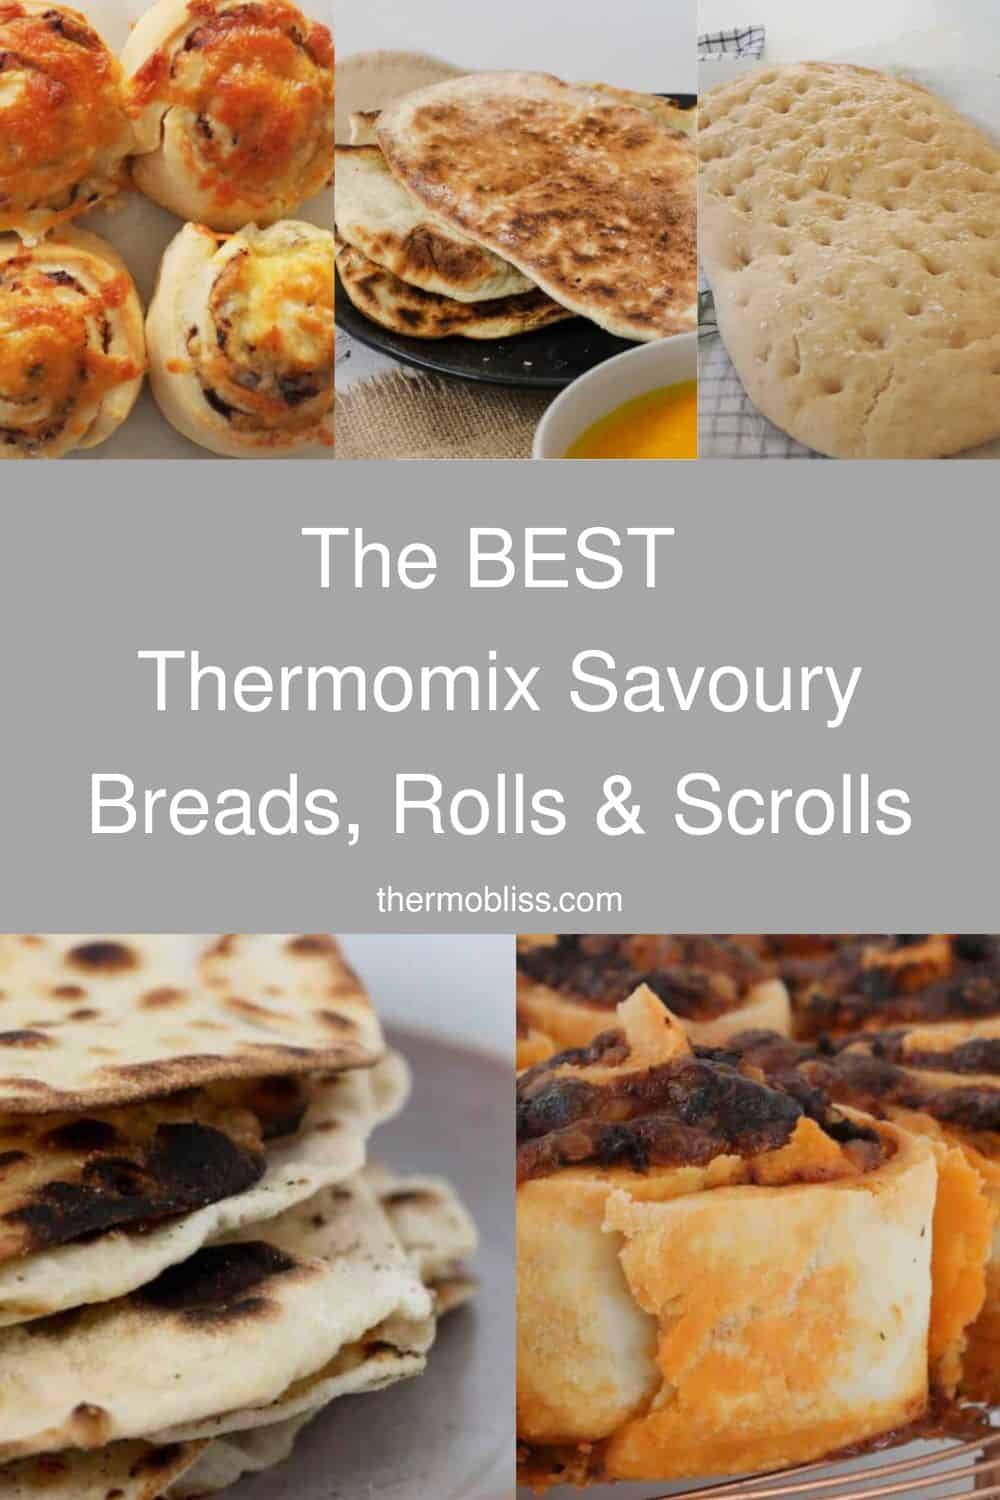 Collage of Savoury Bread, Rolls and Scrolls that can be made using a Thermomix.